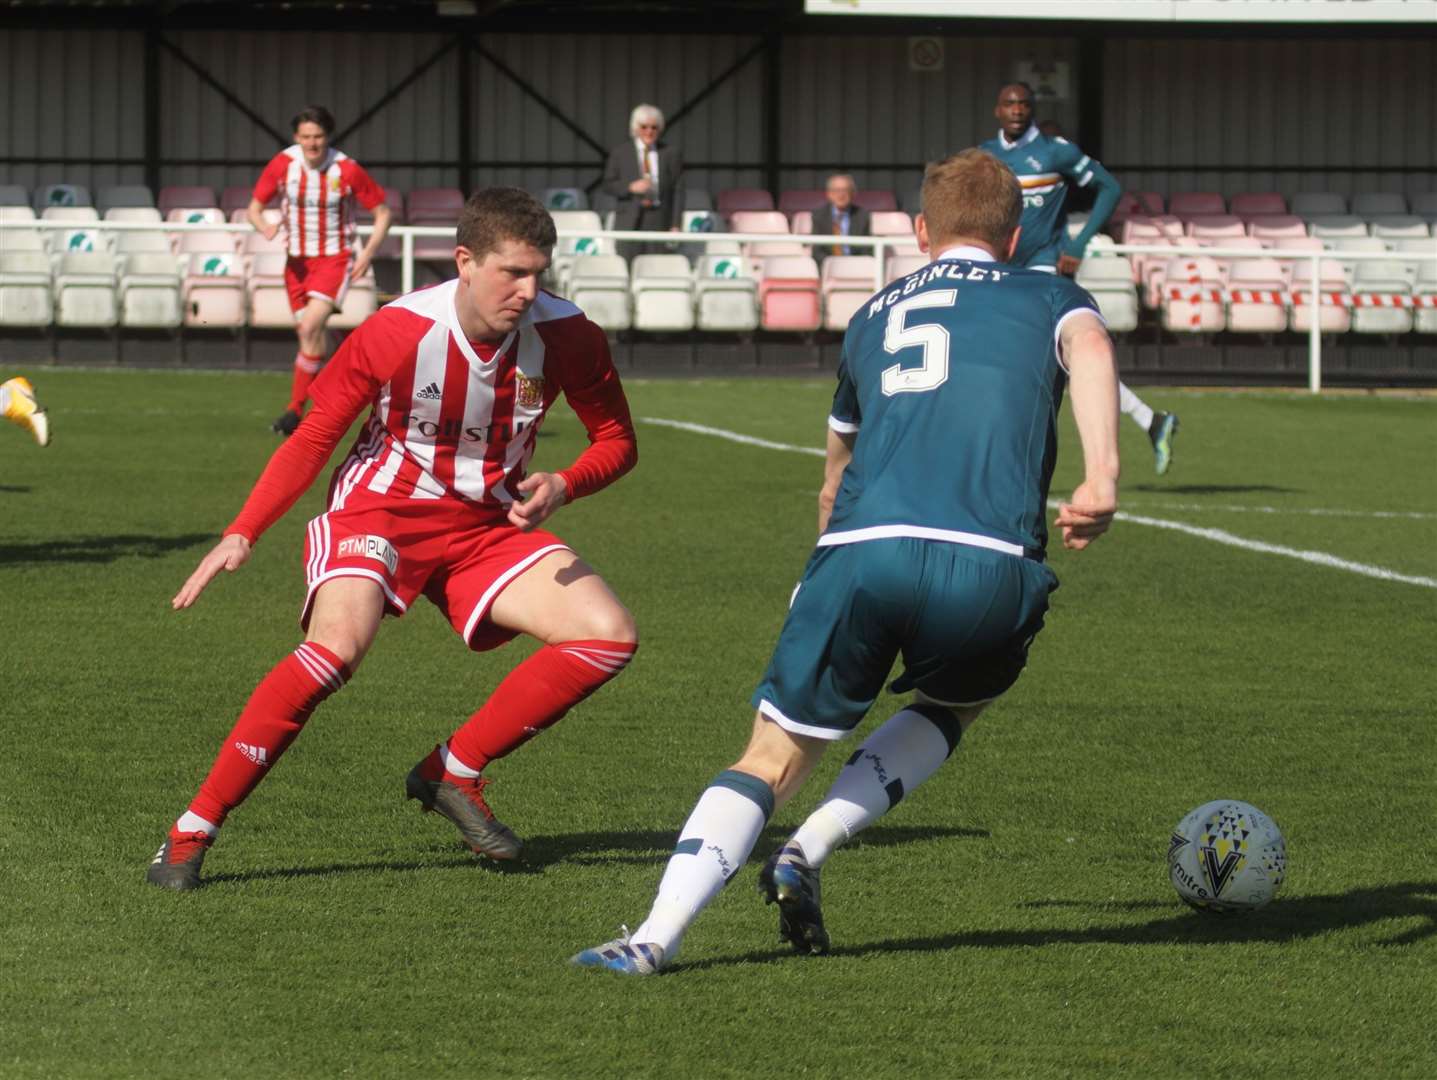 Formartine took on Motherwell at North Lodge Park.